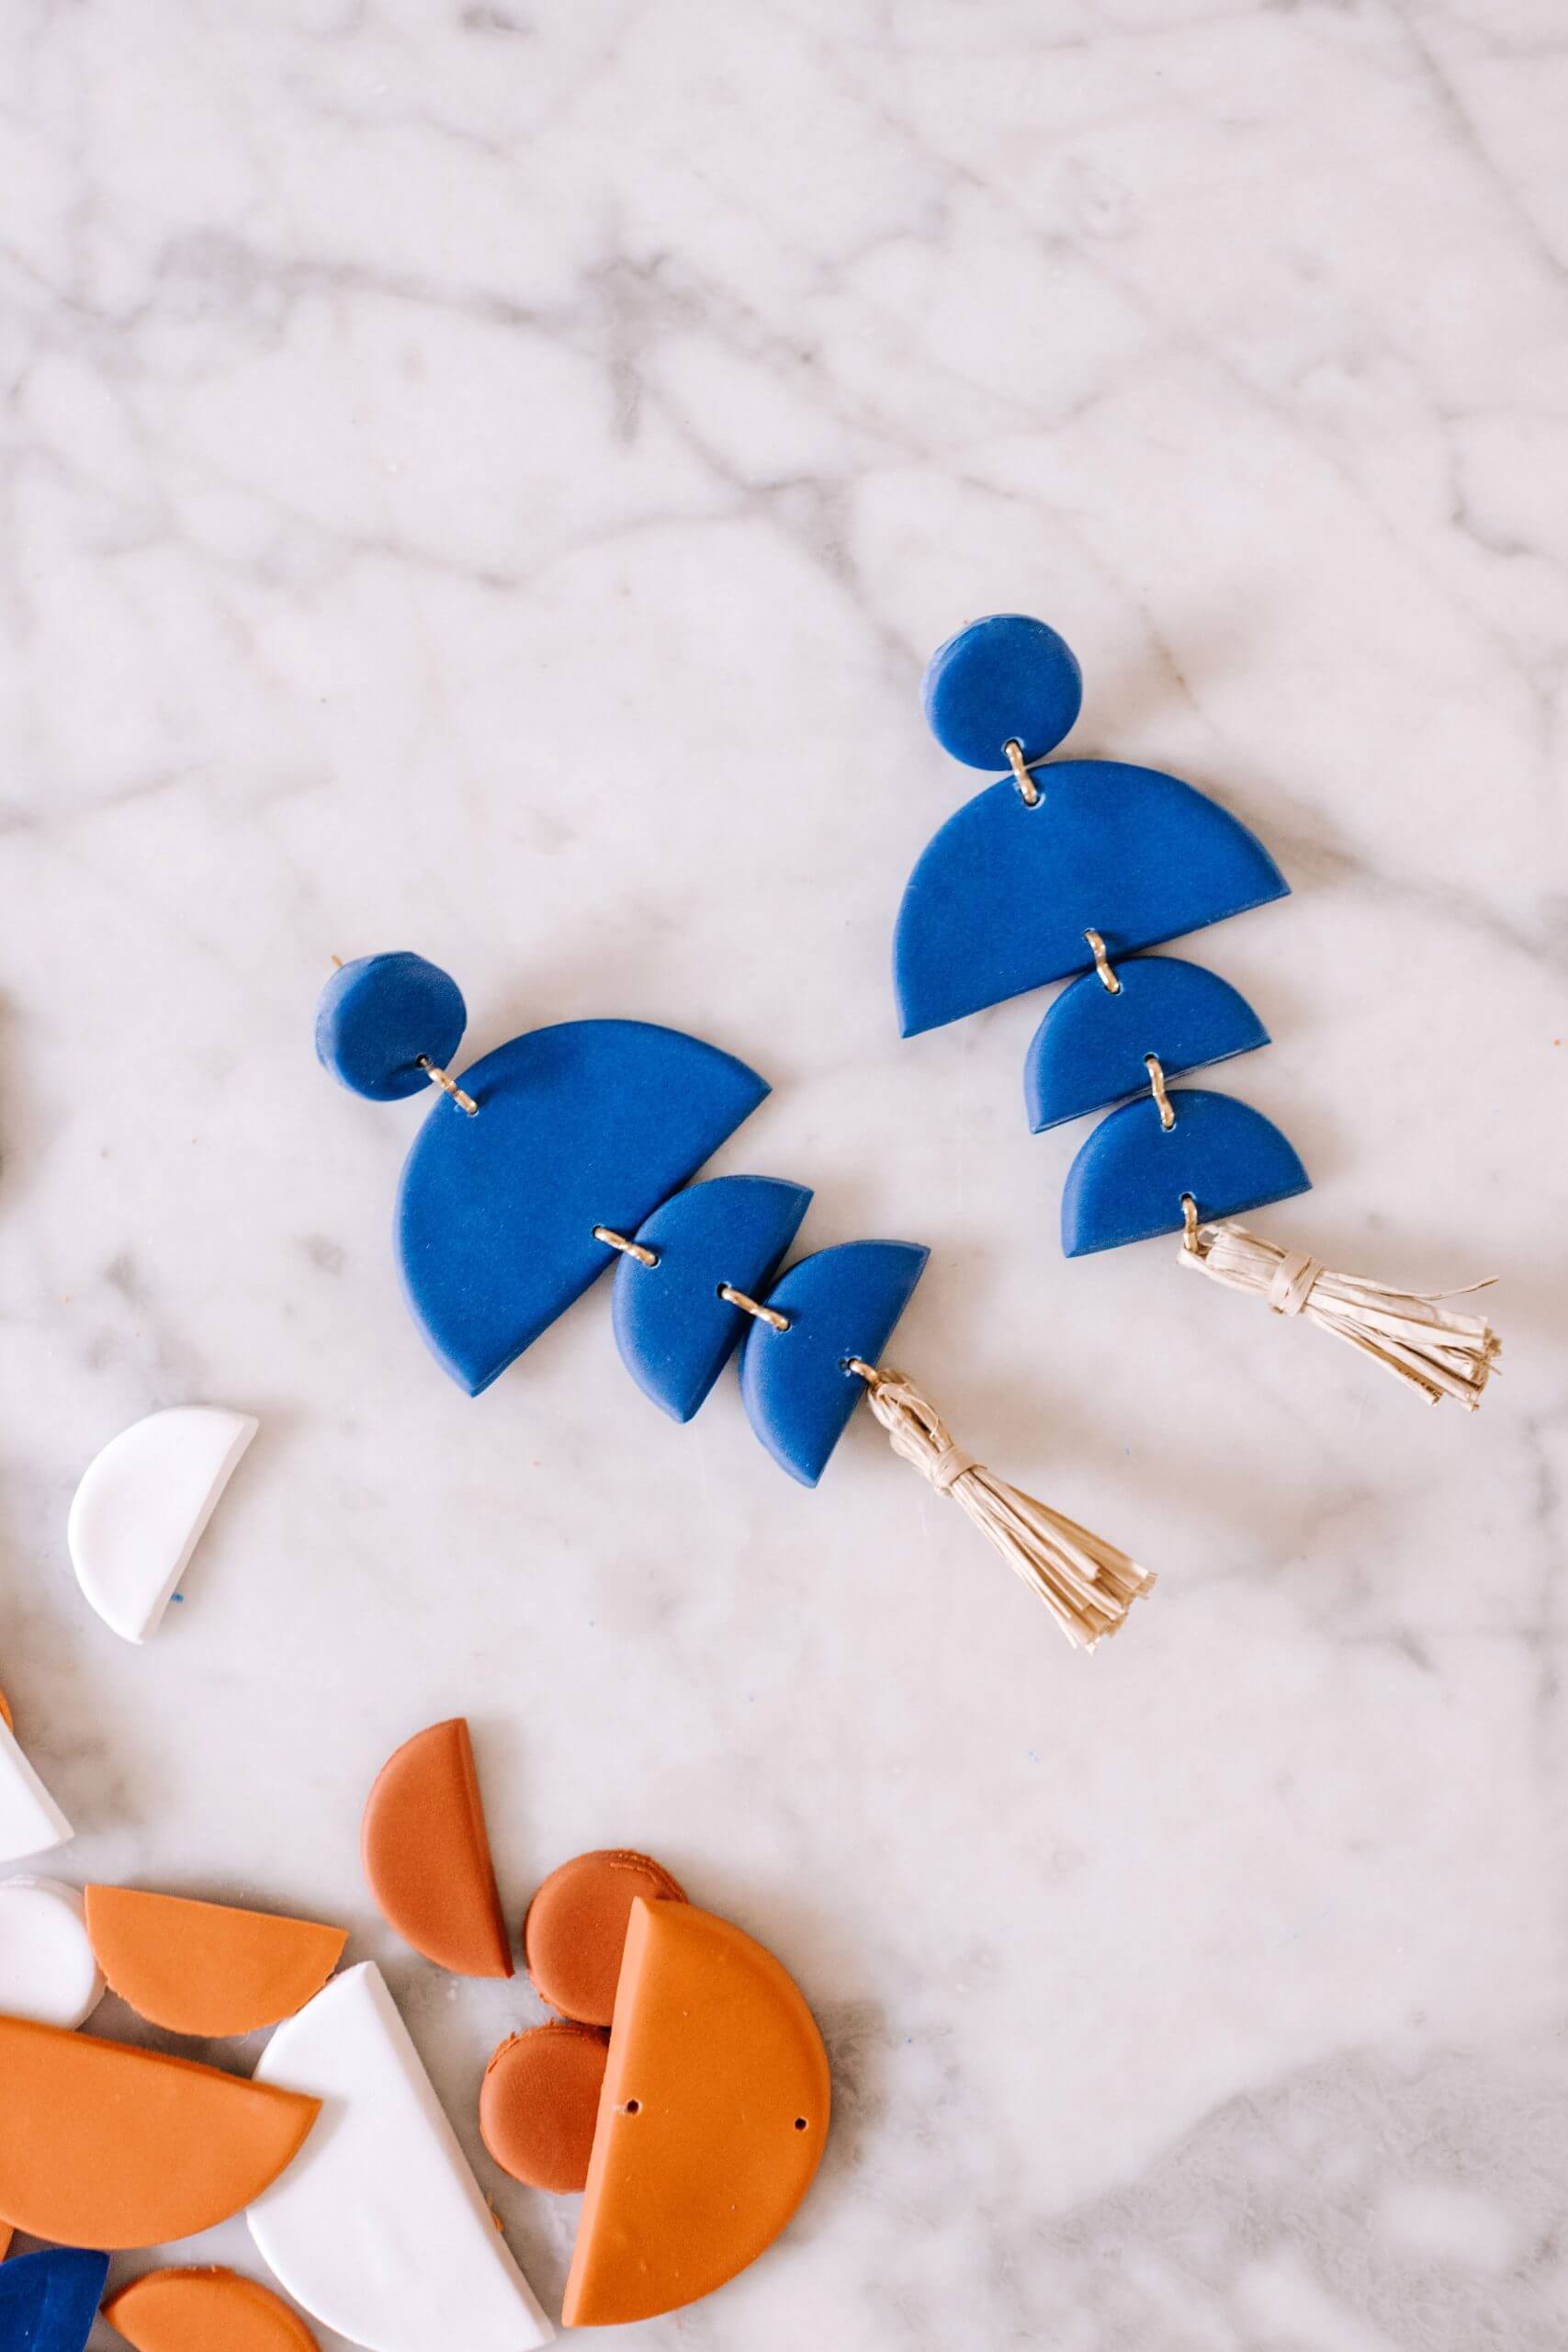 Adorable Polymer Clay Earring Craft Ideas  For Kids Polymer Clay Earrings 